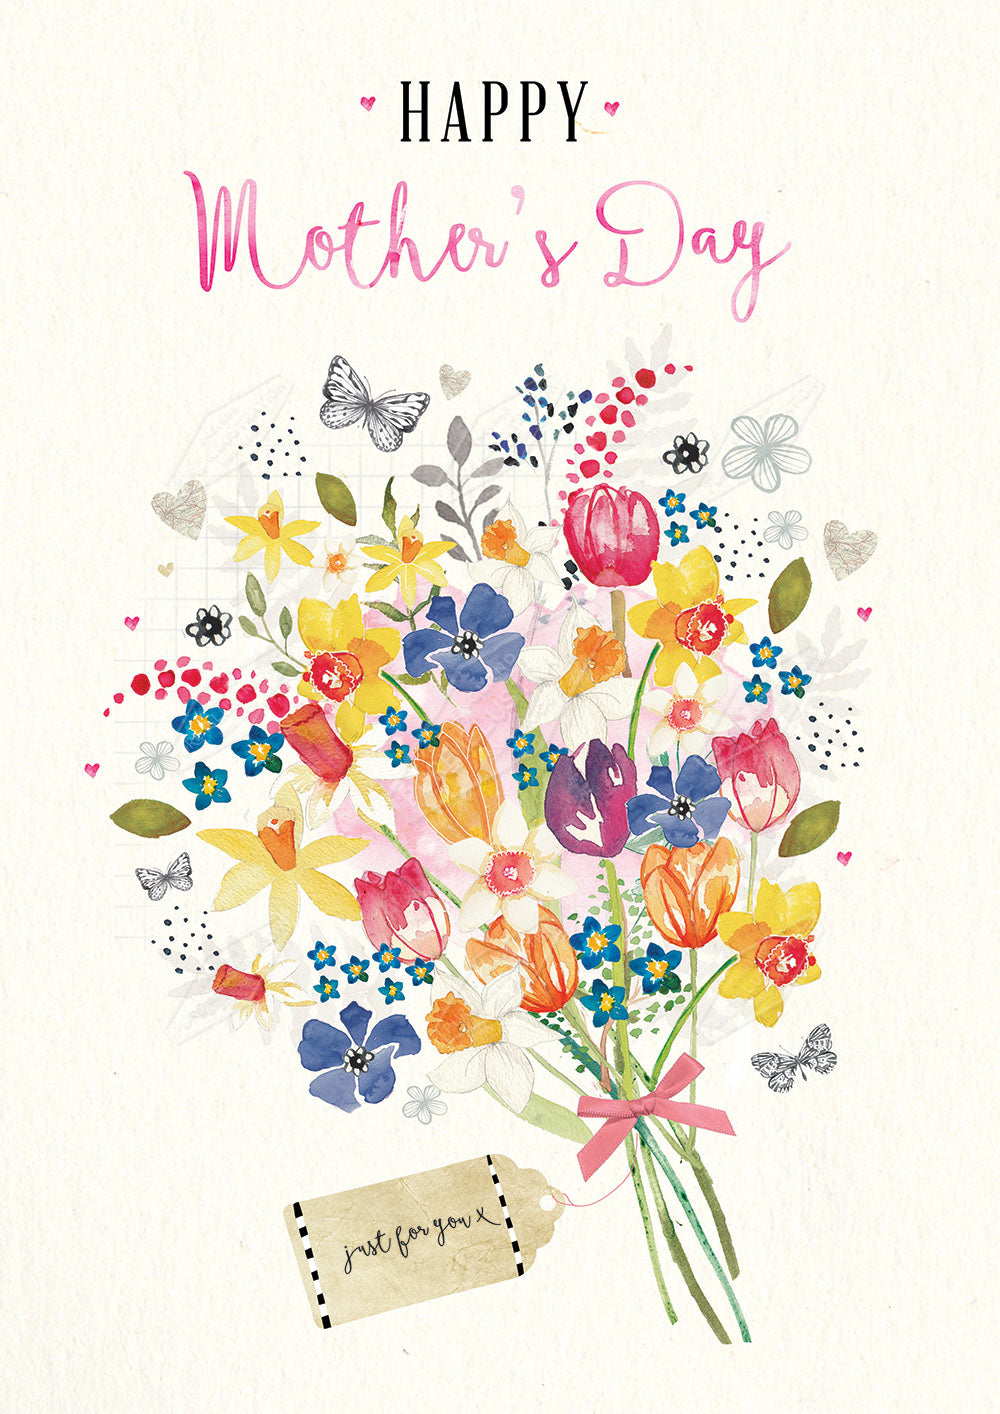 00028107EST- Emily Stalley is represented by Pure Art Licensing Agency - Mother's Day Greeting Card Design